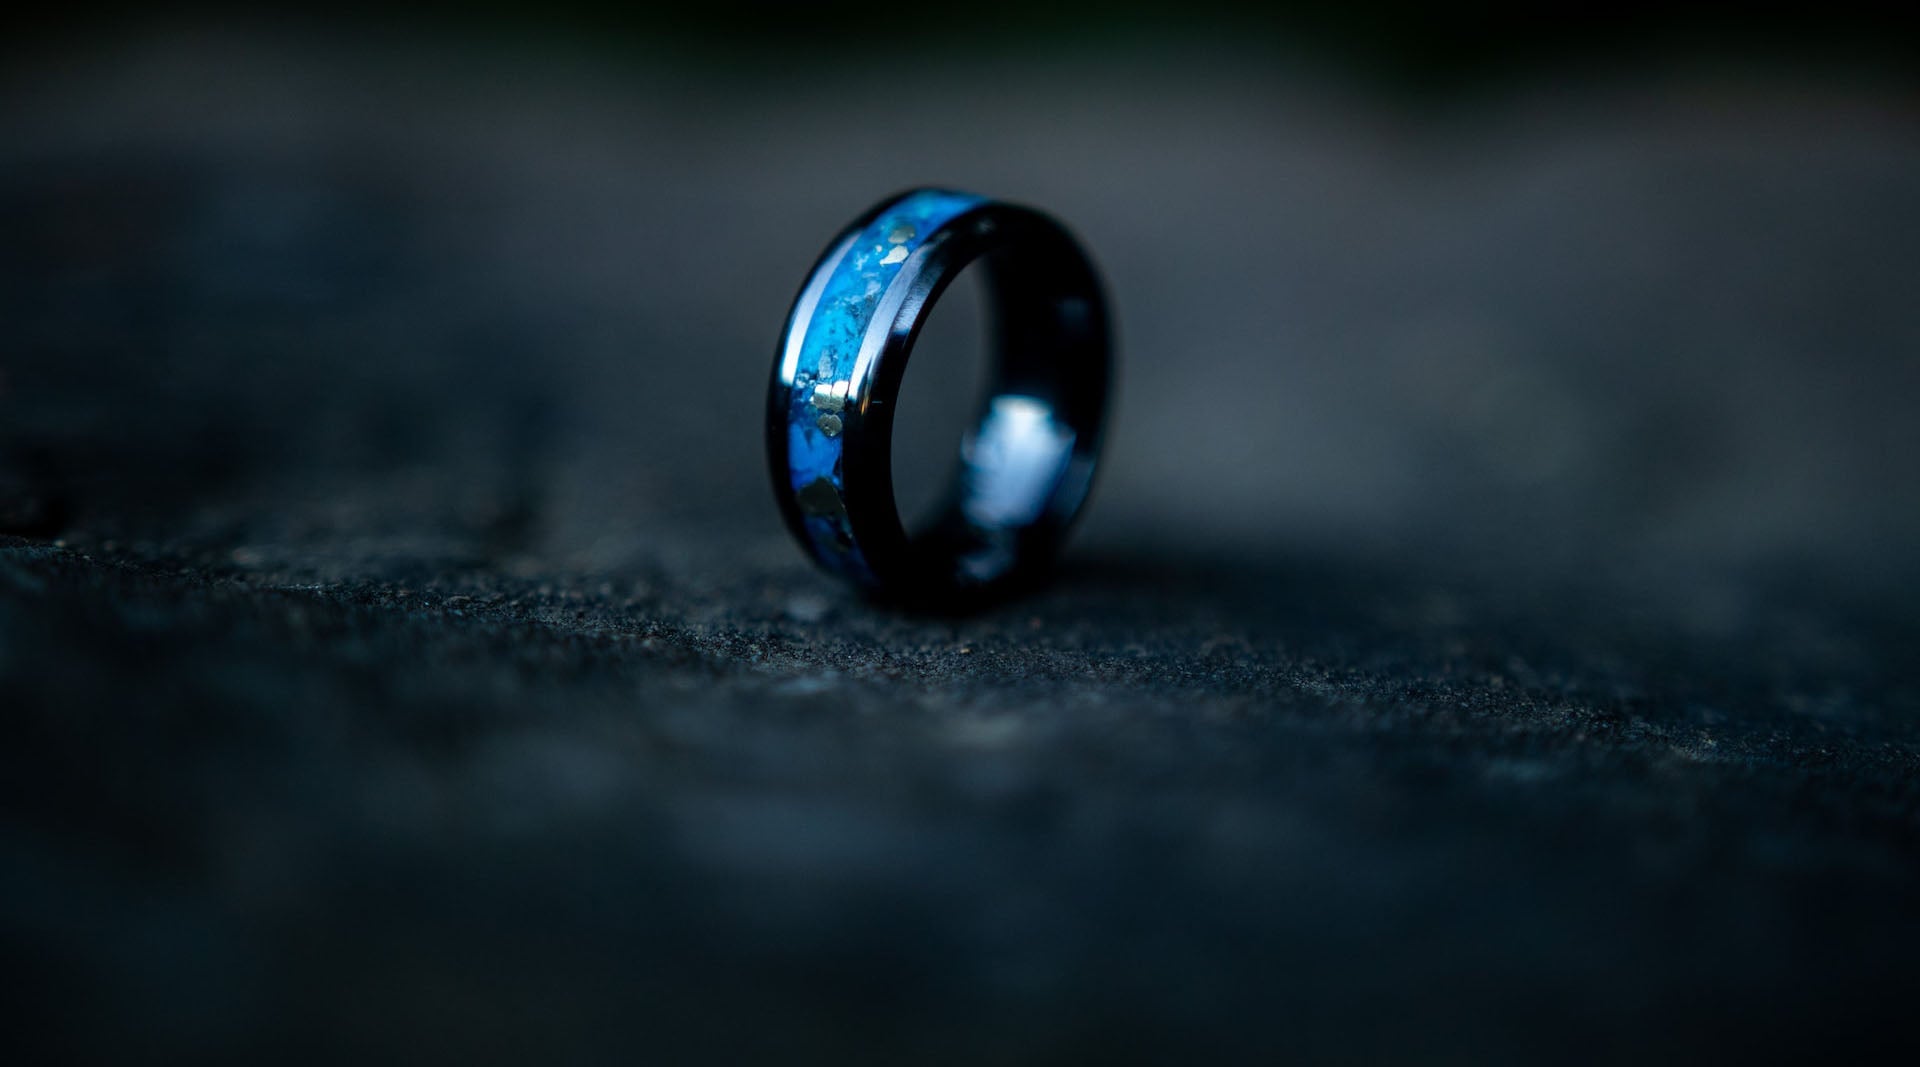 macro photograph of a turquoise fashion ring with a dark background